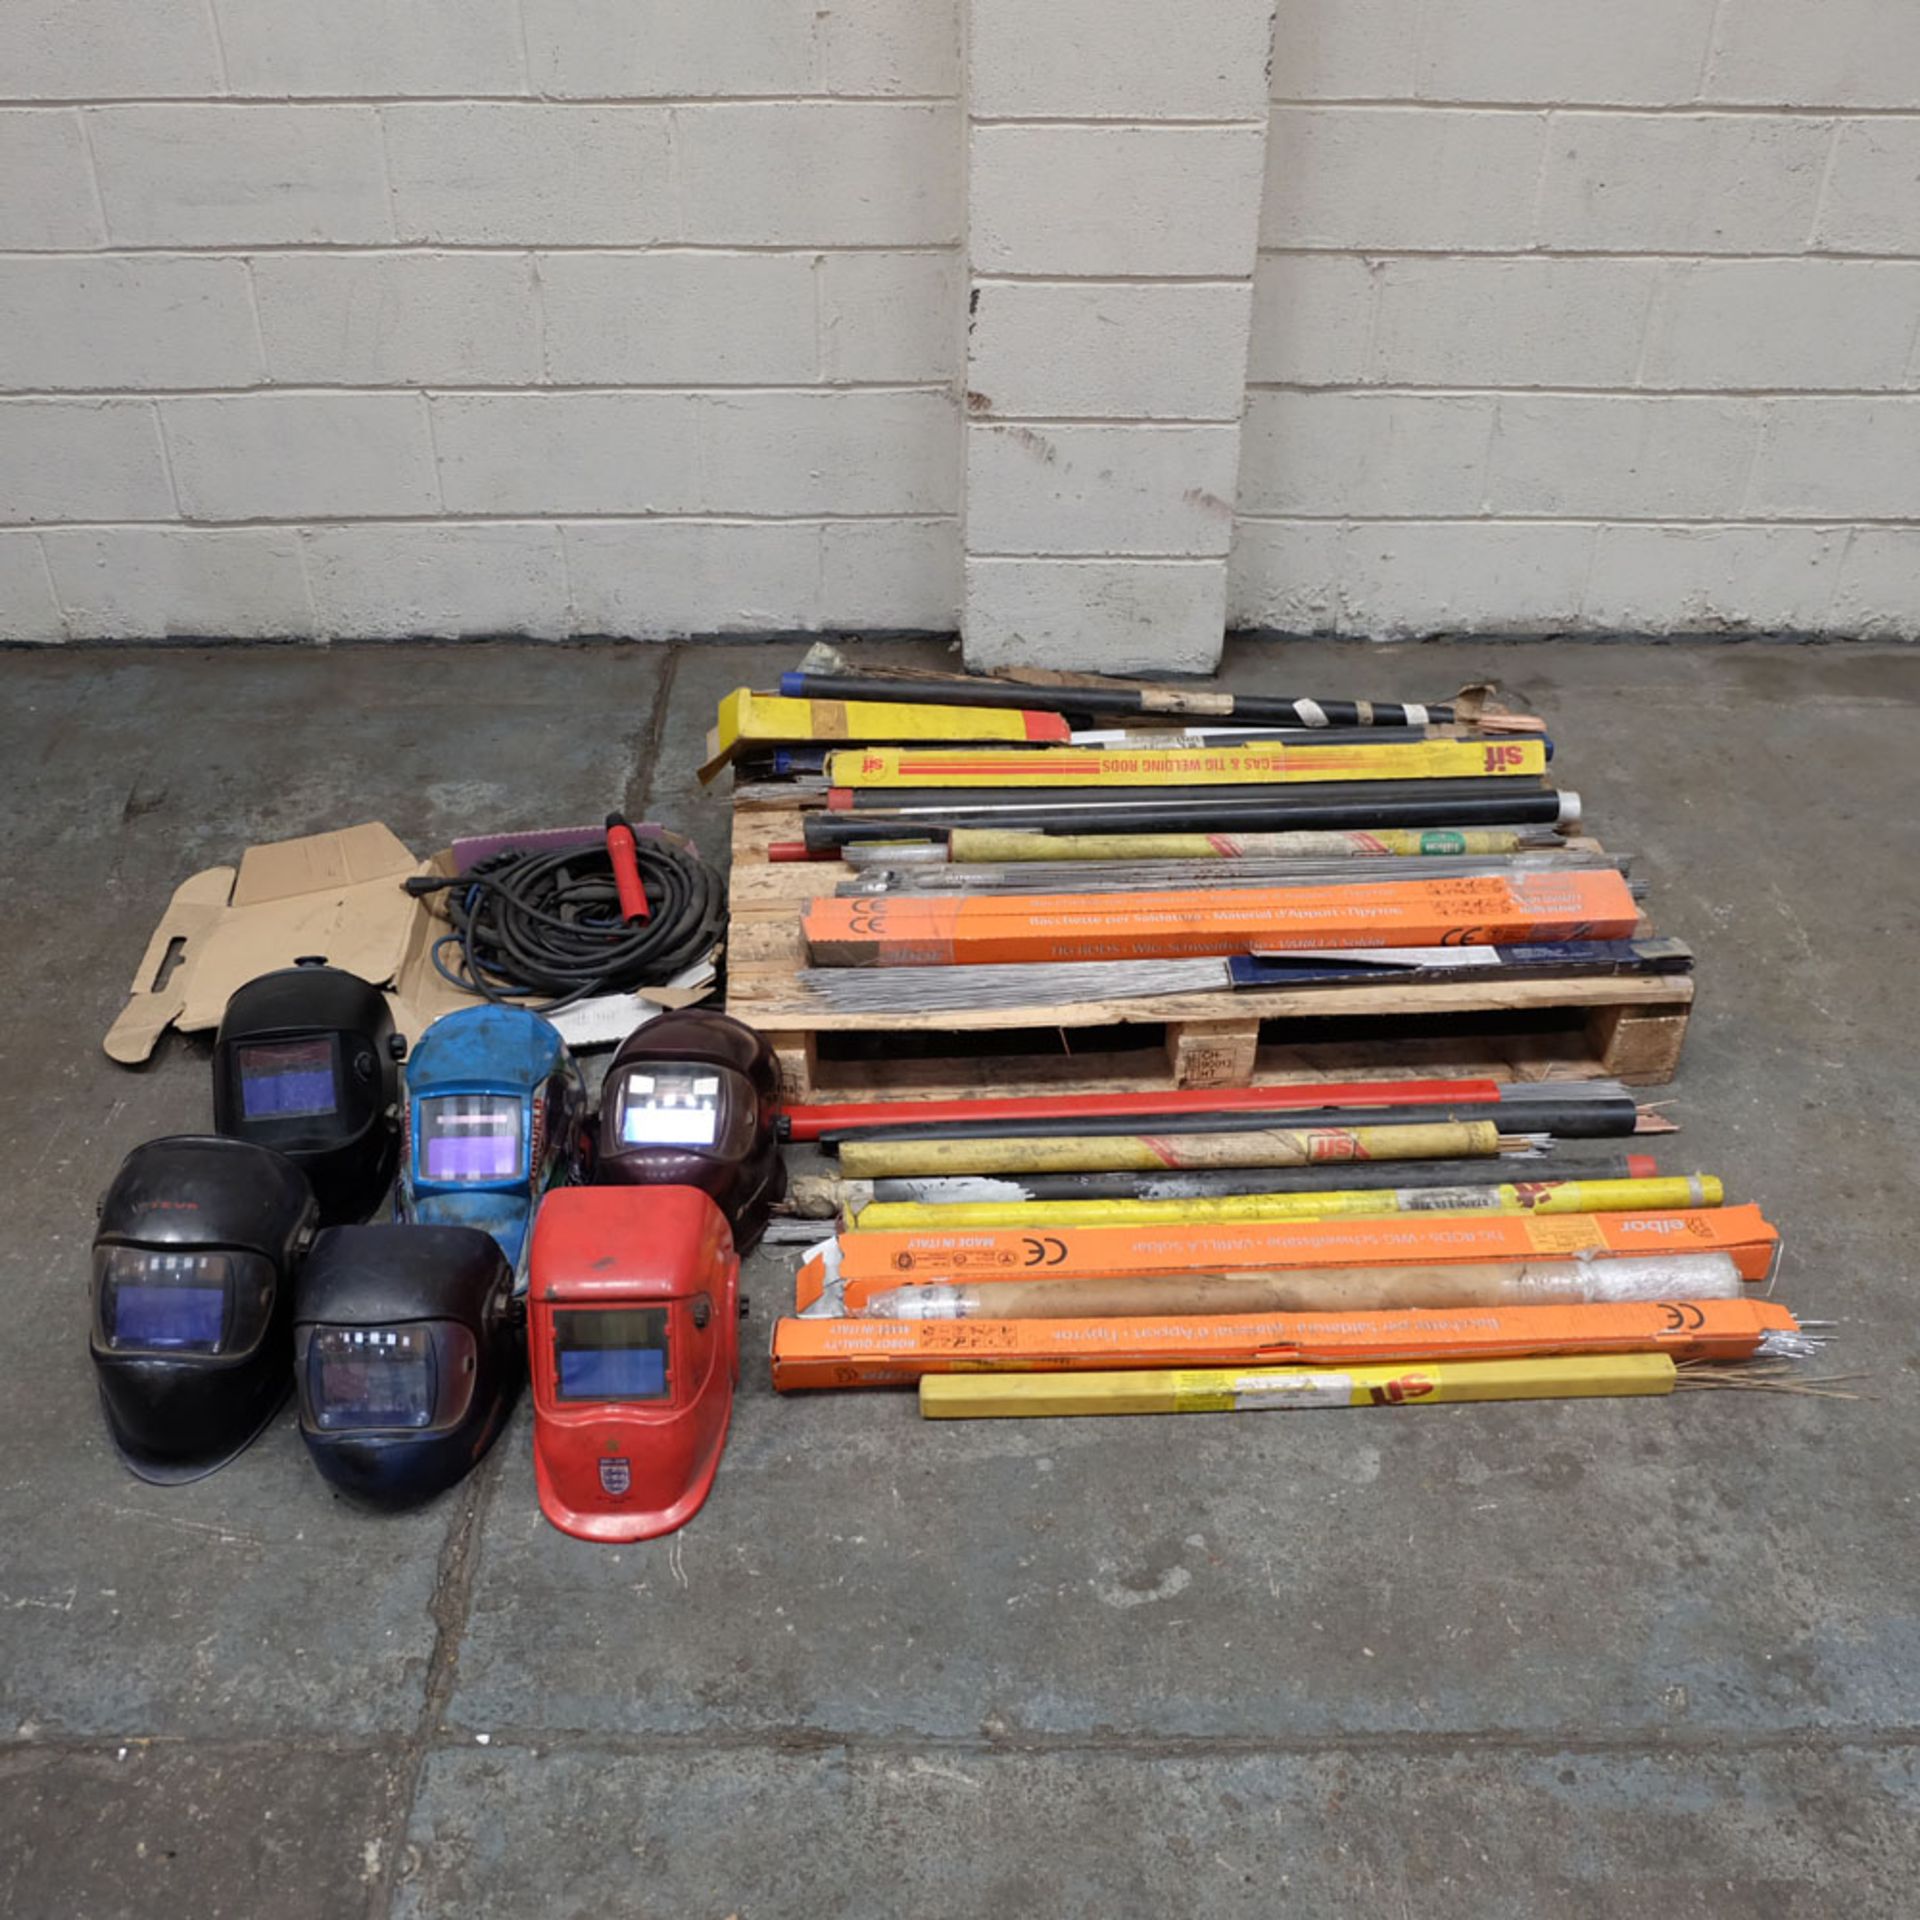 Large Lot of Various Welding Equipment including Welding Rods and Welding Masks.